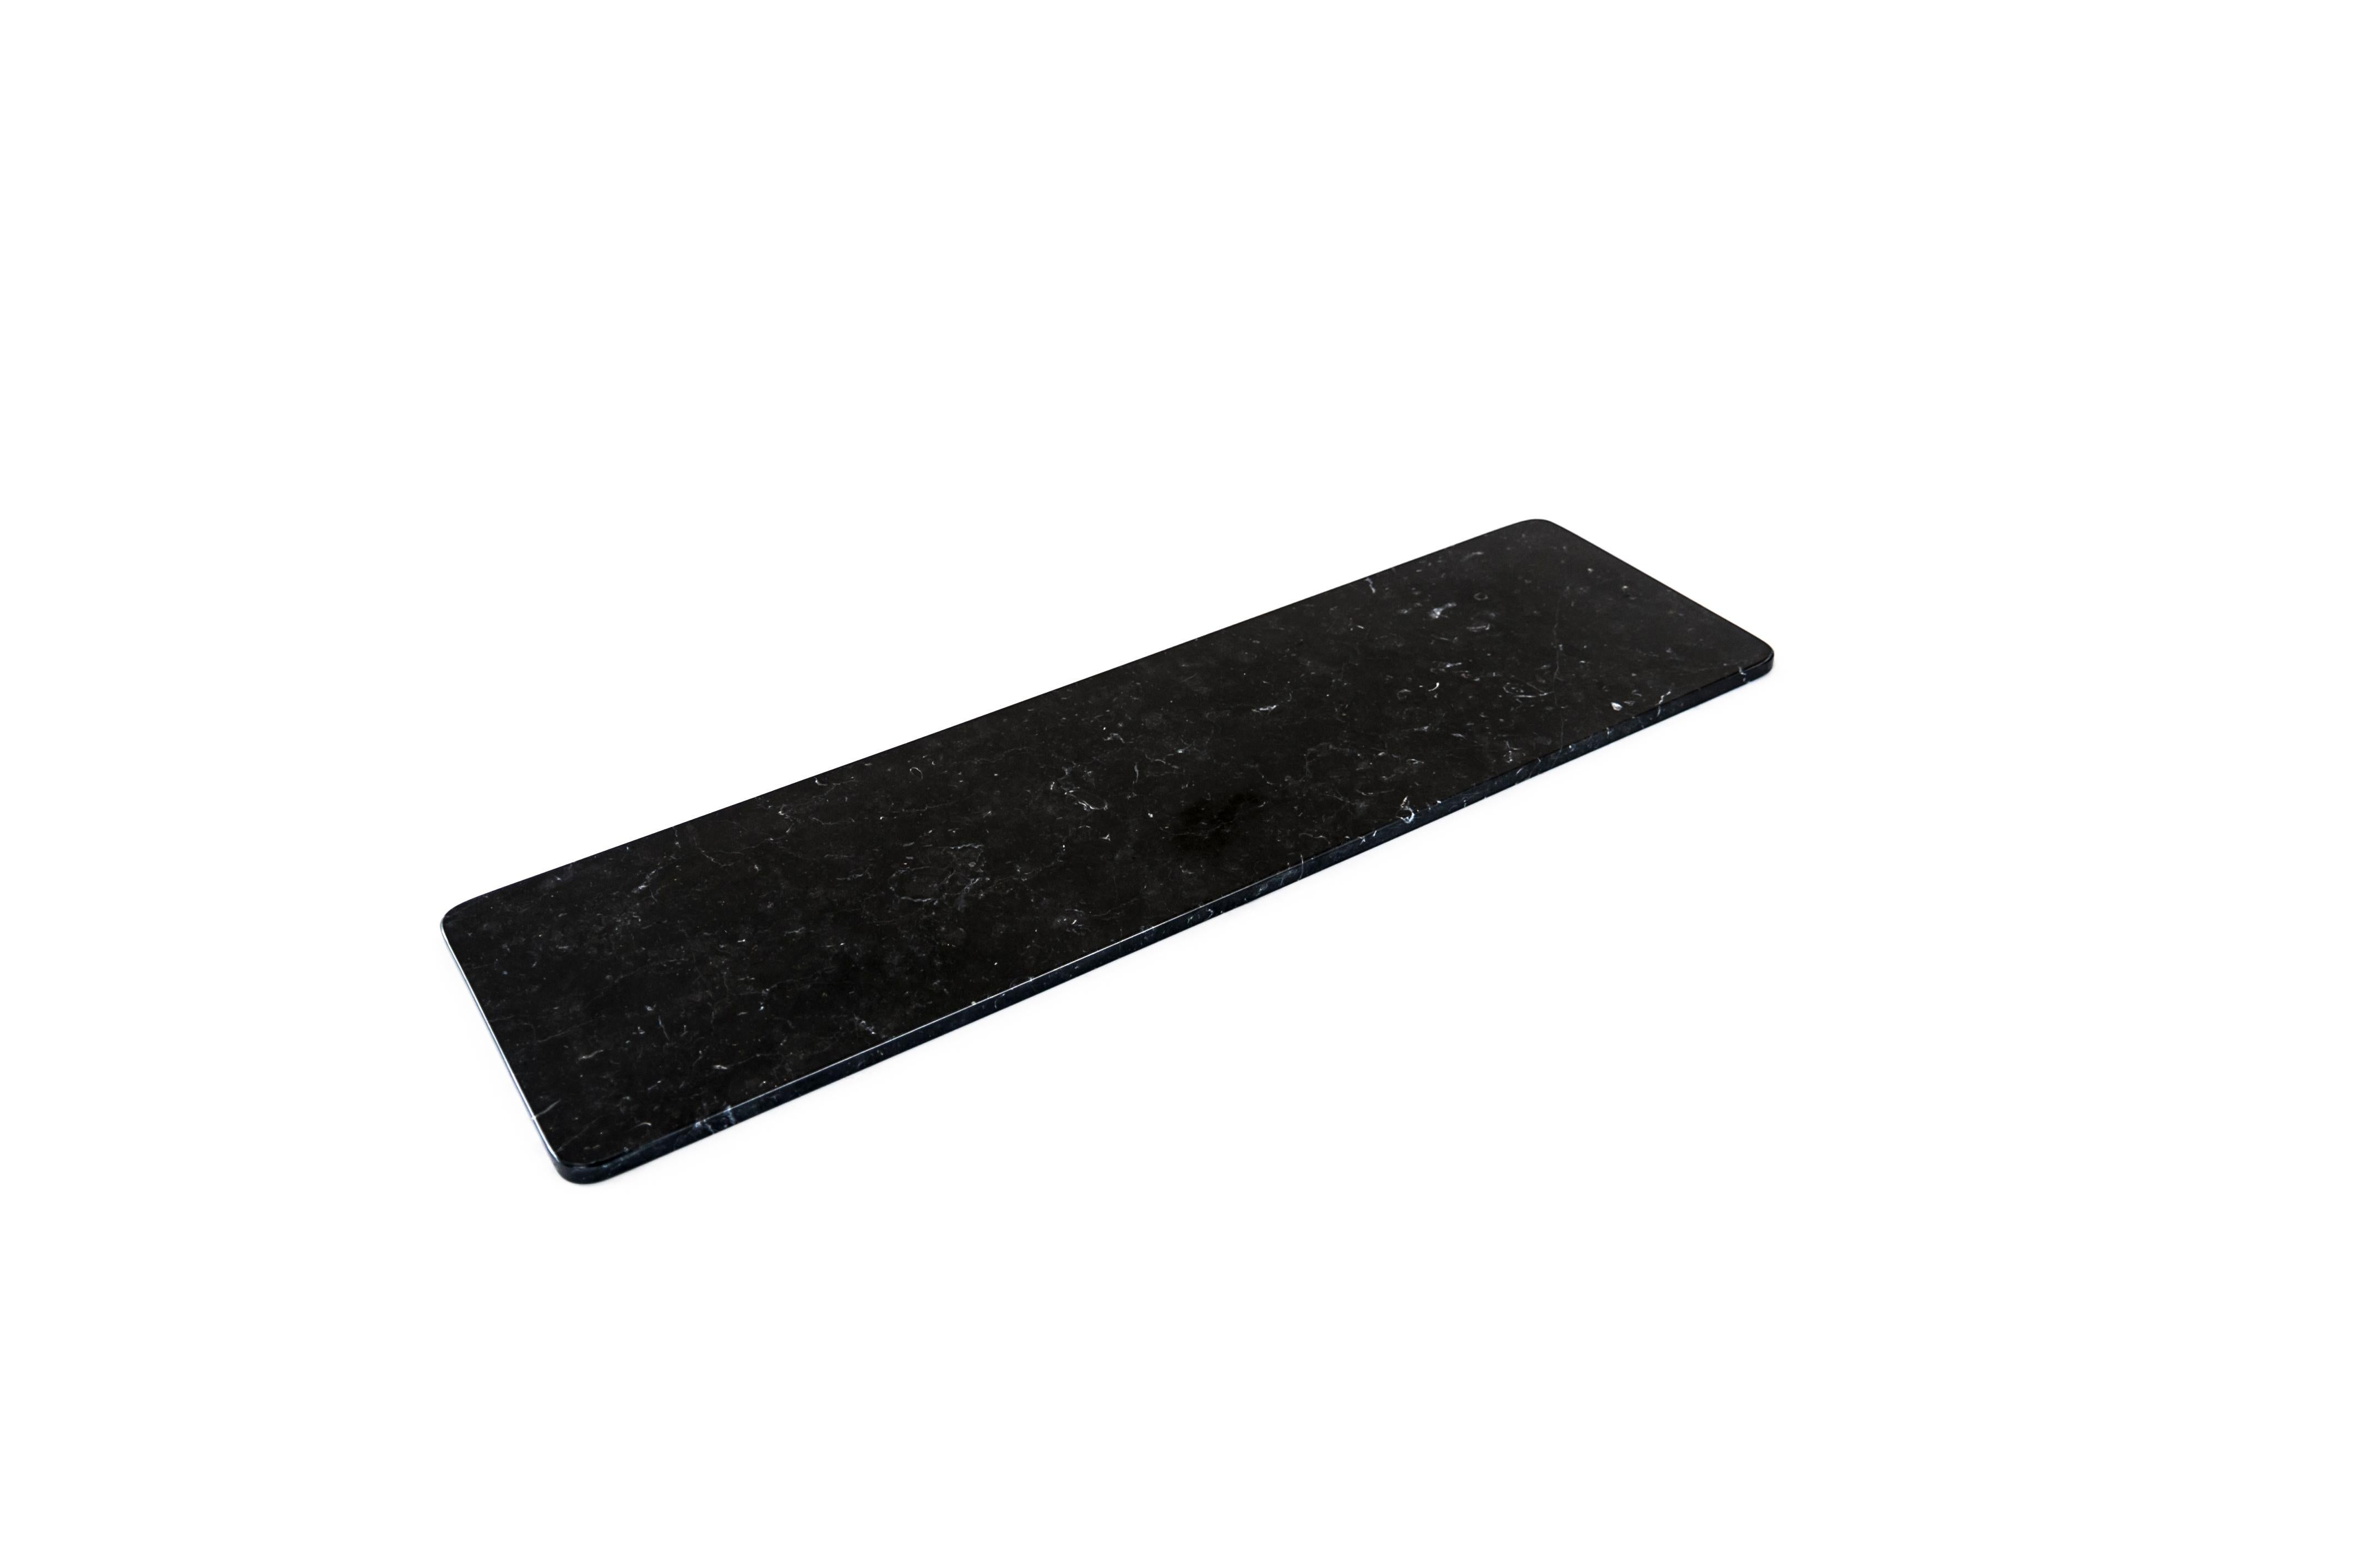 Long plate for salmon - cheese plate - sushi plate - serving dish in black Marquina marble.

Ideal for spa, hotel, restaurant and to serve food in a very sophisticate plate in your house. It can be used also as a nice display of sweets and